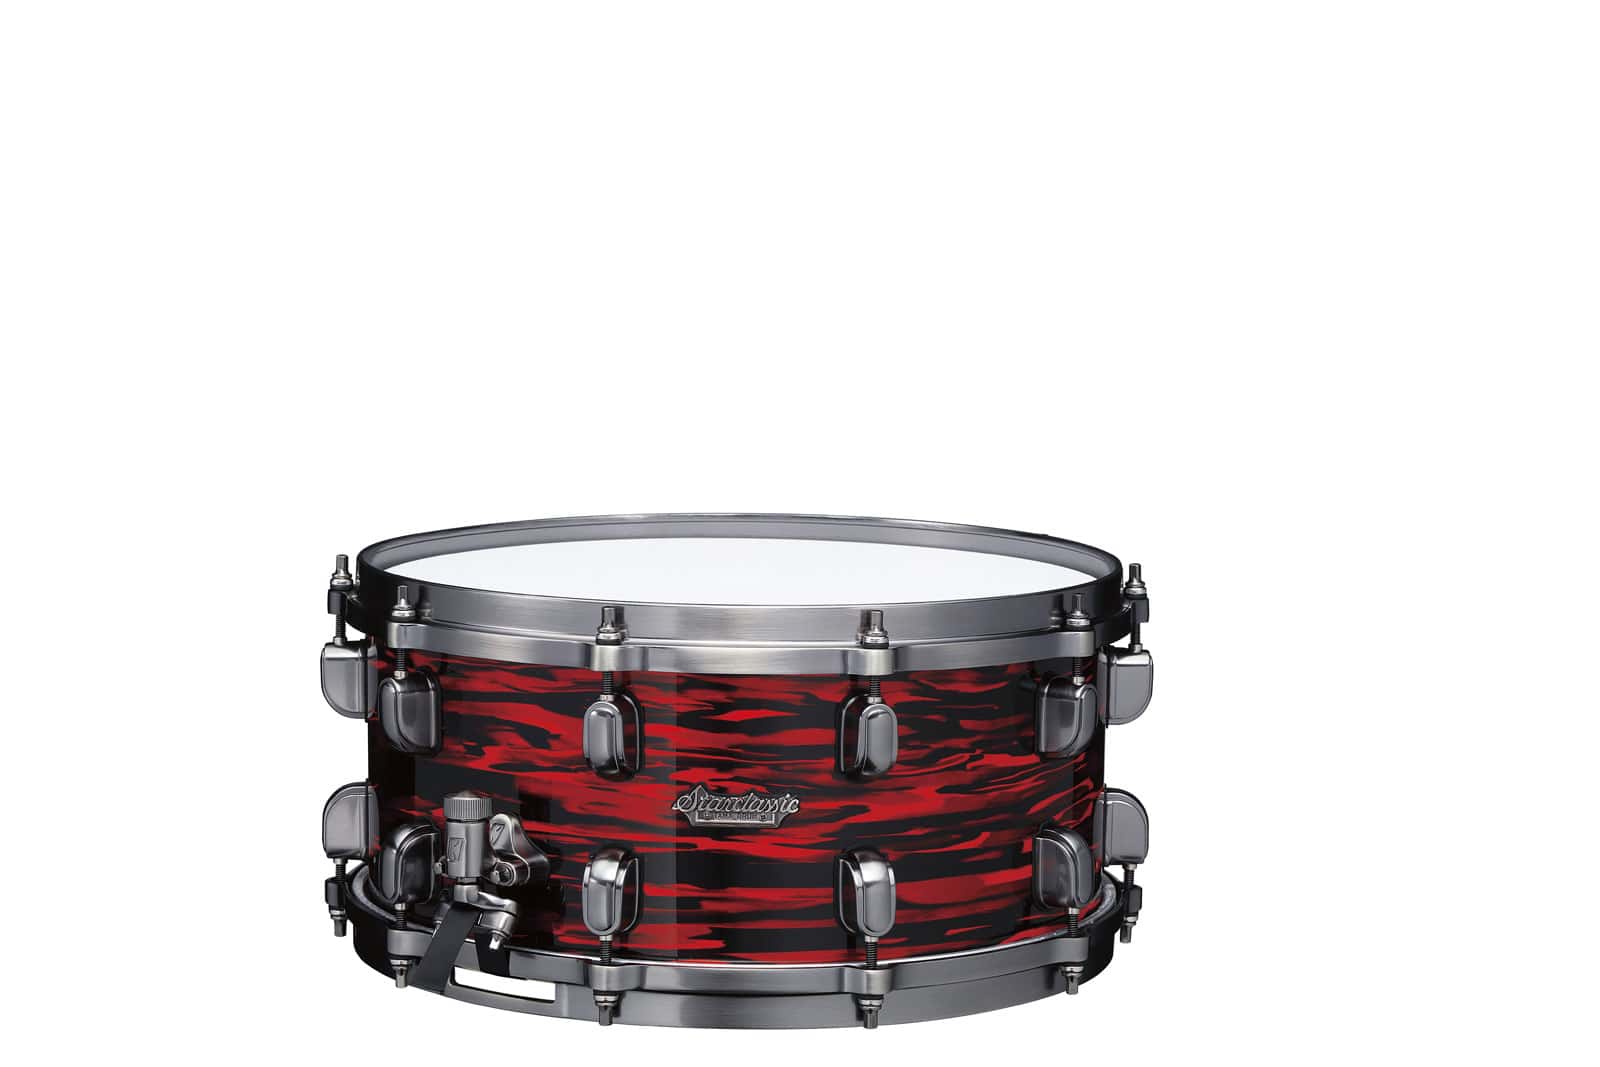 TAMA STARCLASSIC MAPLE 14X6.5 SNARE DRUM, SMOKED BLACK NICKEL SHELL HARDWARE RED OYSTER